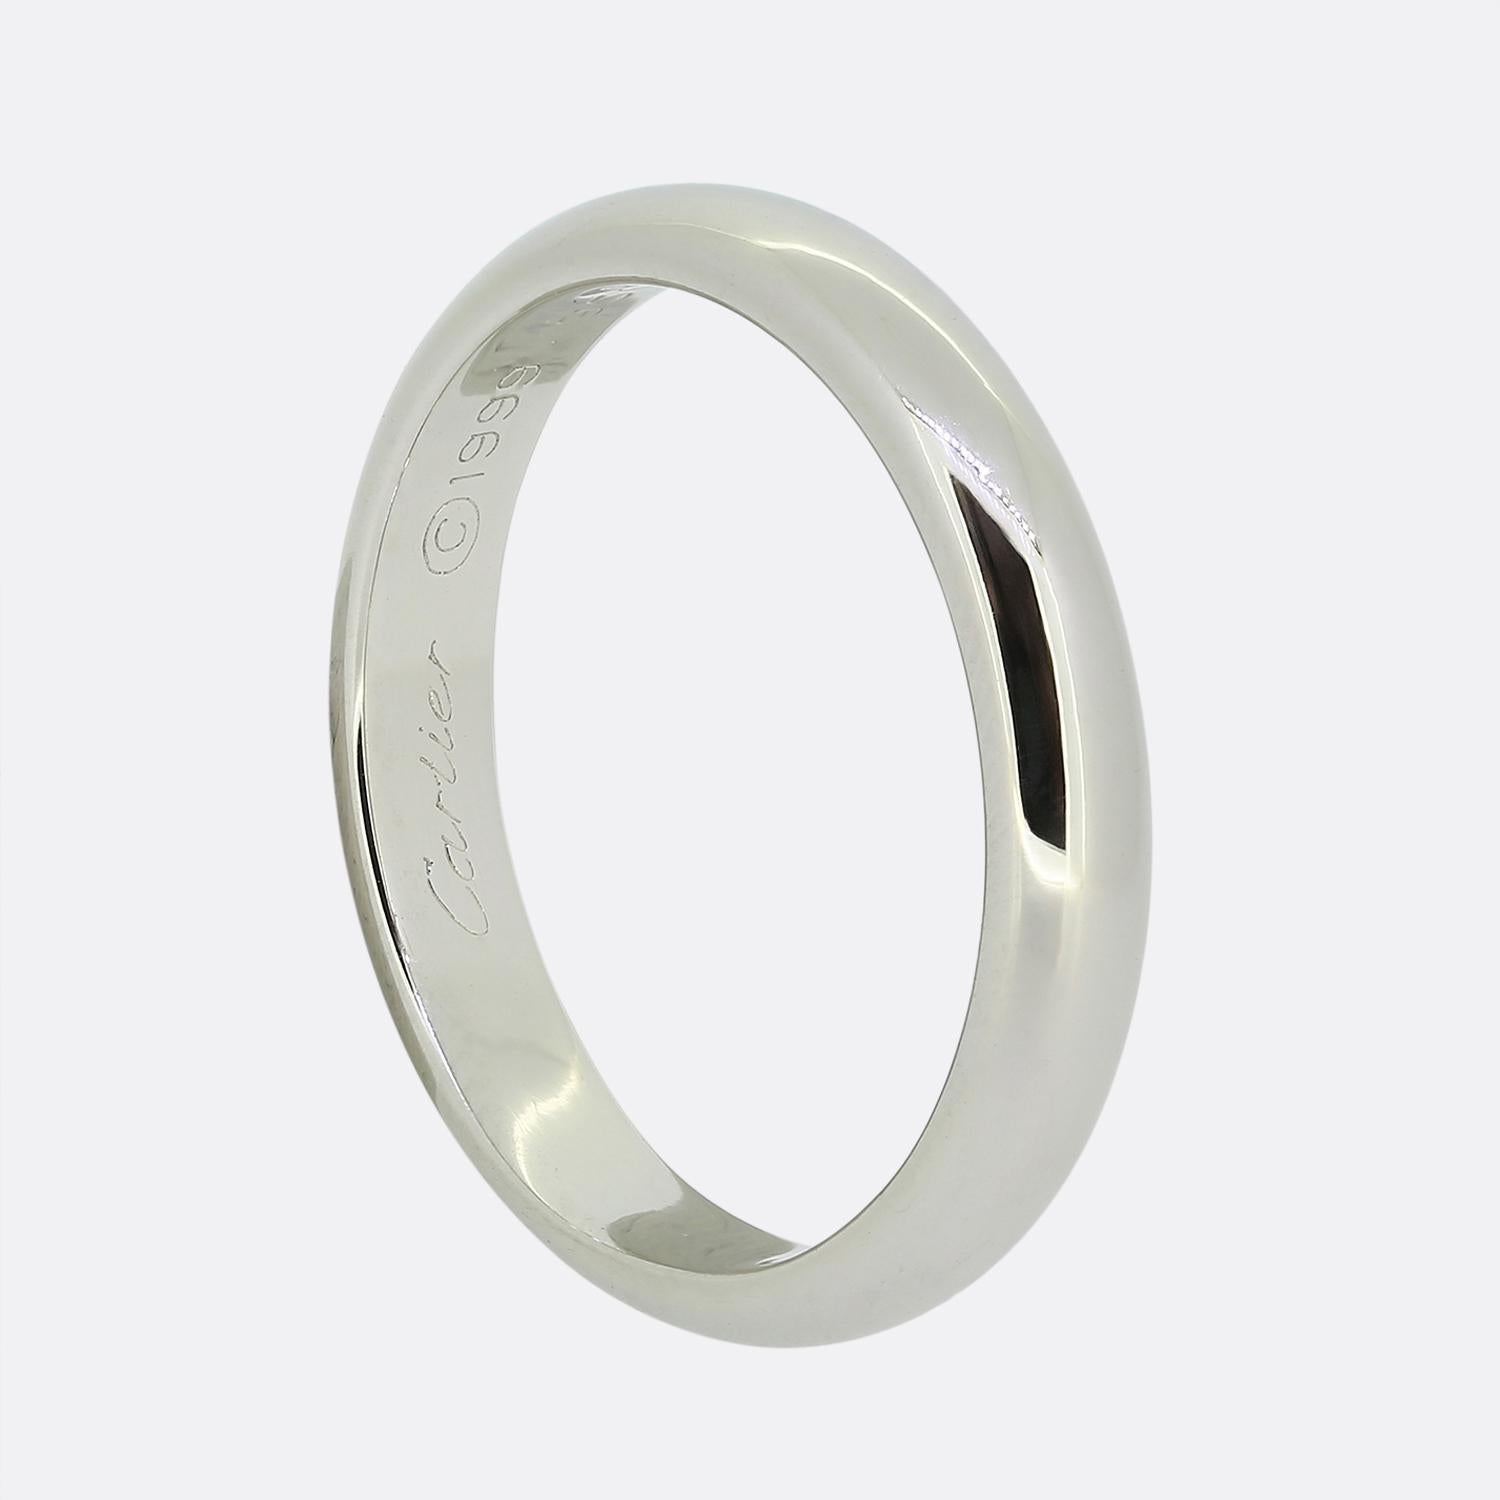 Here we have a plain D-shaped wedding band ring from the world renowned jewellery house of Cartier. This vintage piece has been crafted from platinum, is 4mm in width and is marked on the inside to the year 1999. 

Condition: Used (Very